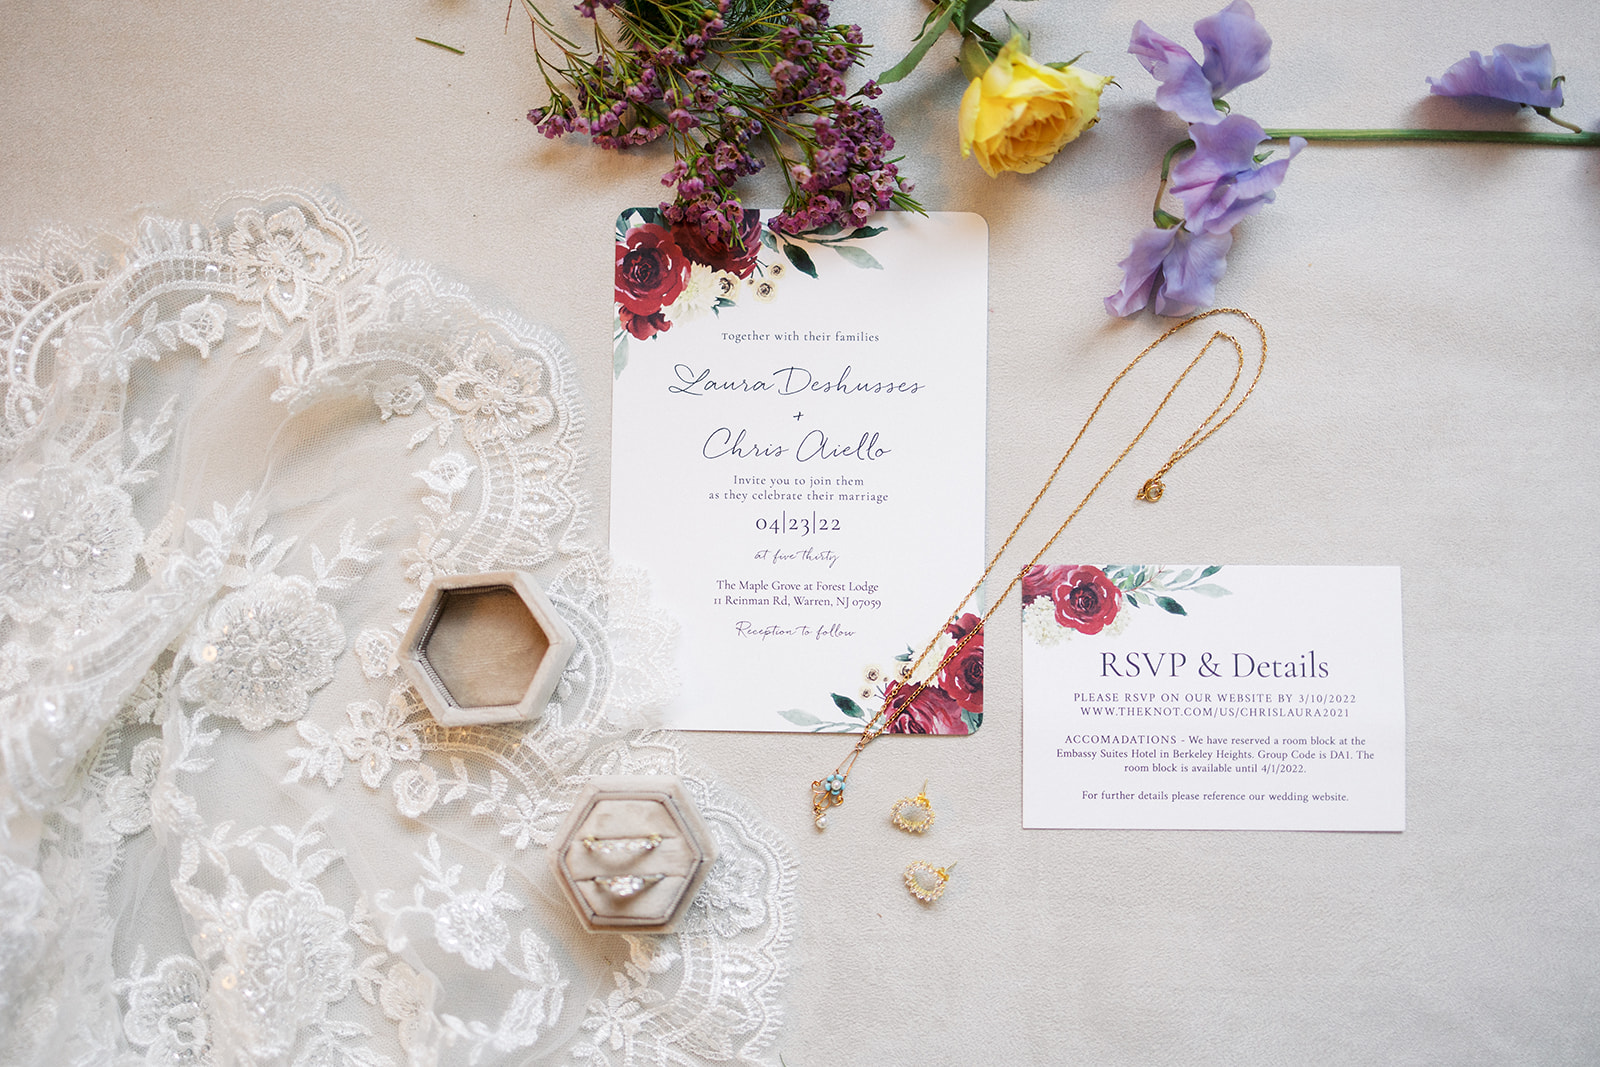 Details of lace jewelry and flowers sit on a table with wedding invitations